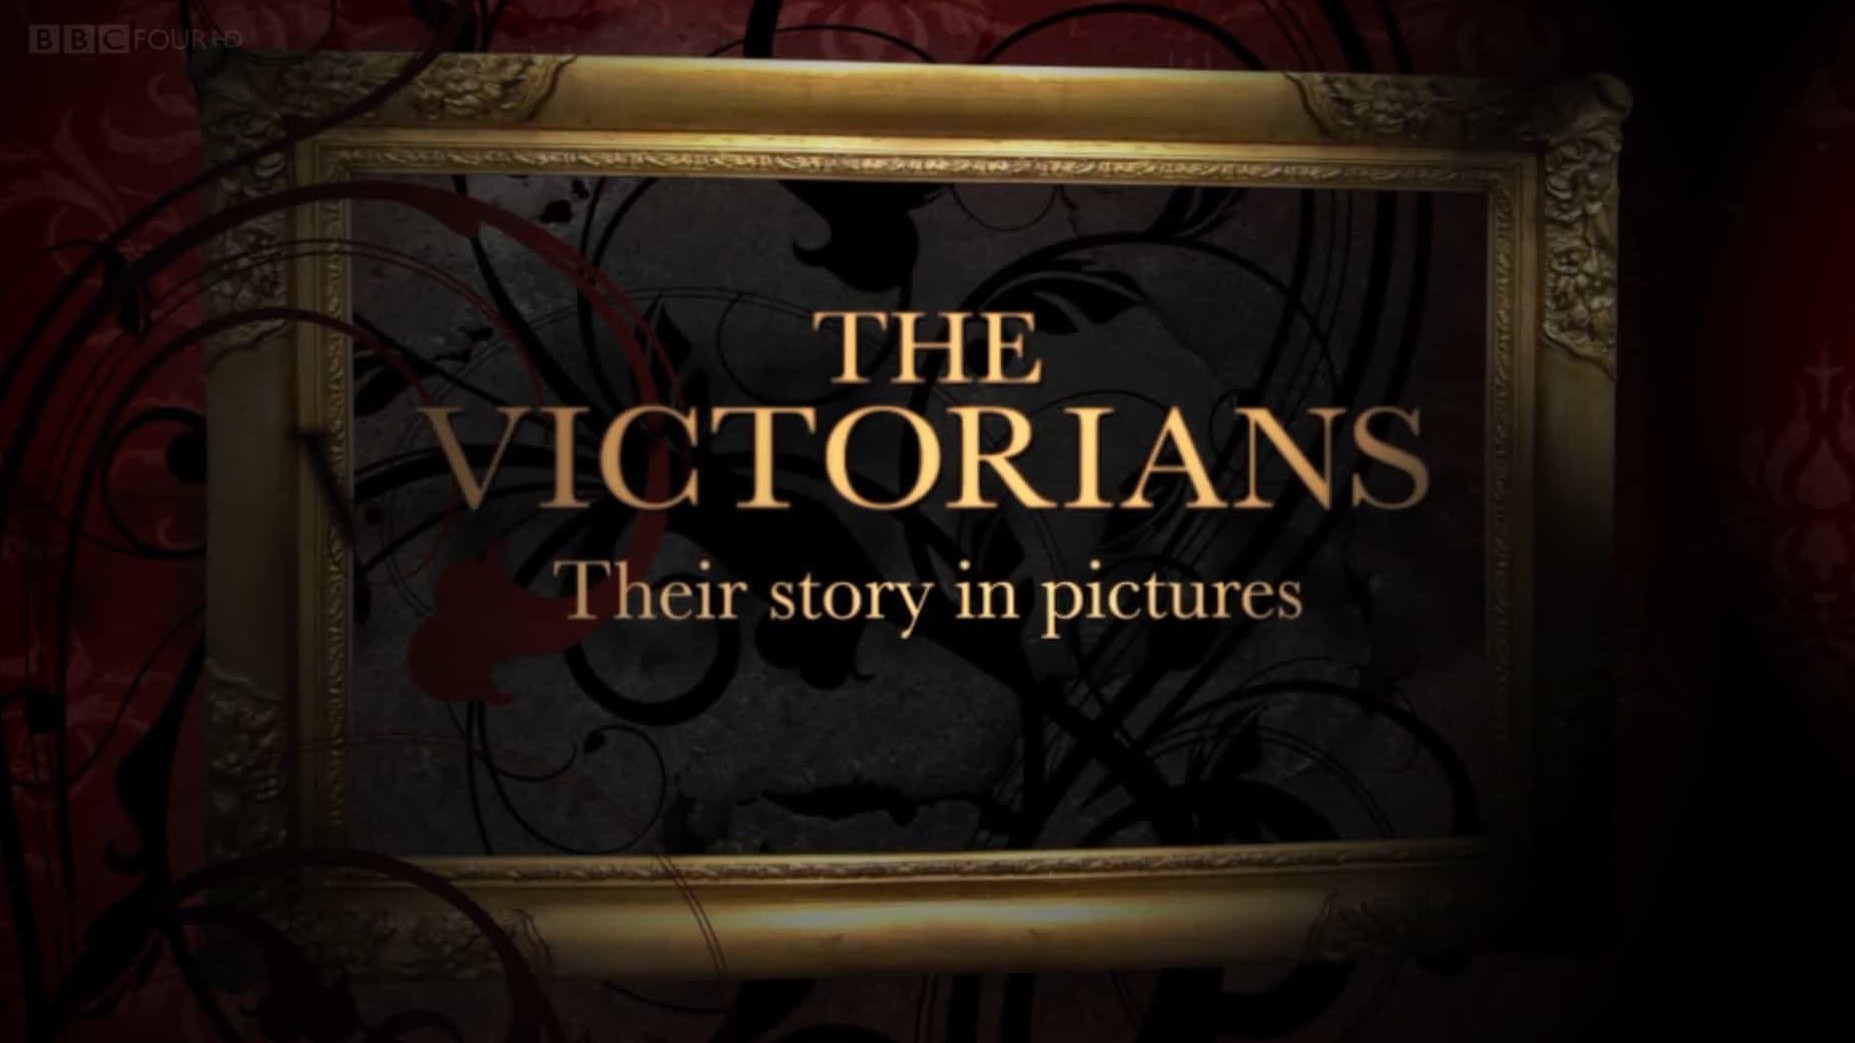 BBC纪录片《画作中的维多利亚 / The Victorians-Their Story in Pictures/绘画中的维多利亚时代/ The Victorians 2009》全4集 英语中英双语字幕 720P高清下载